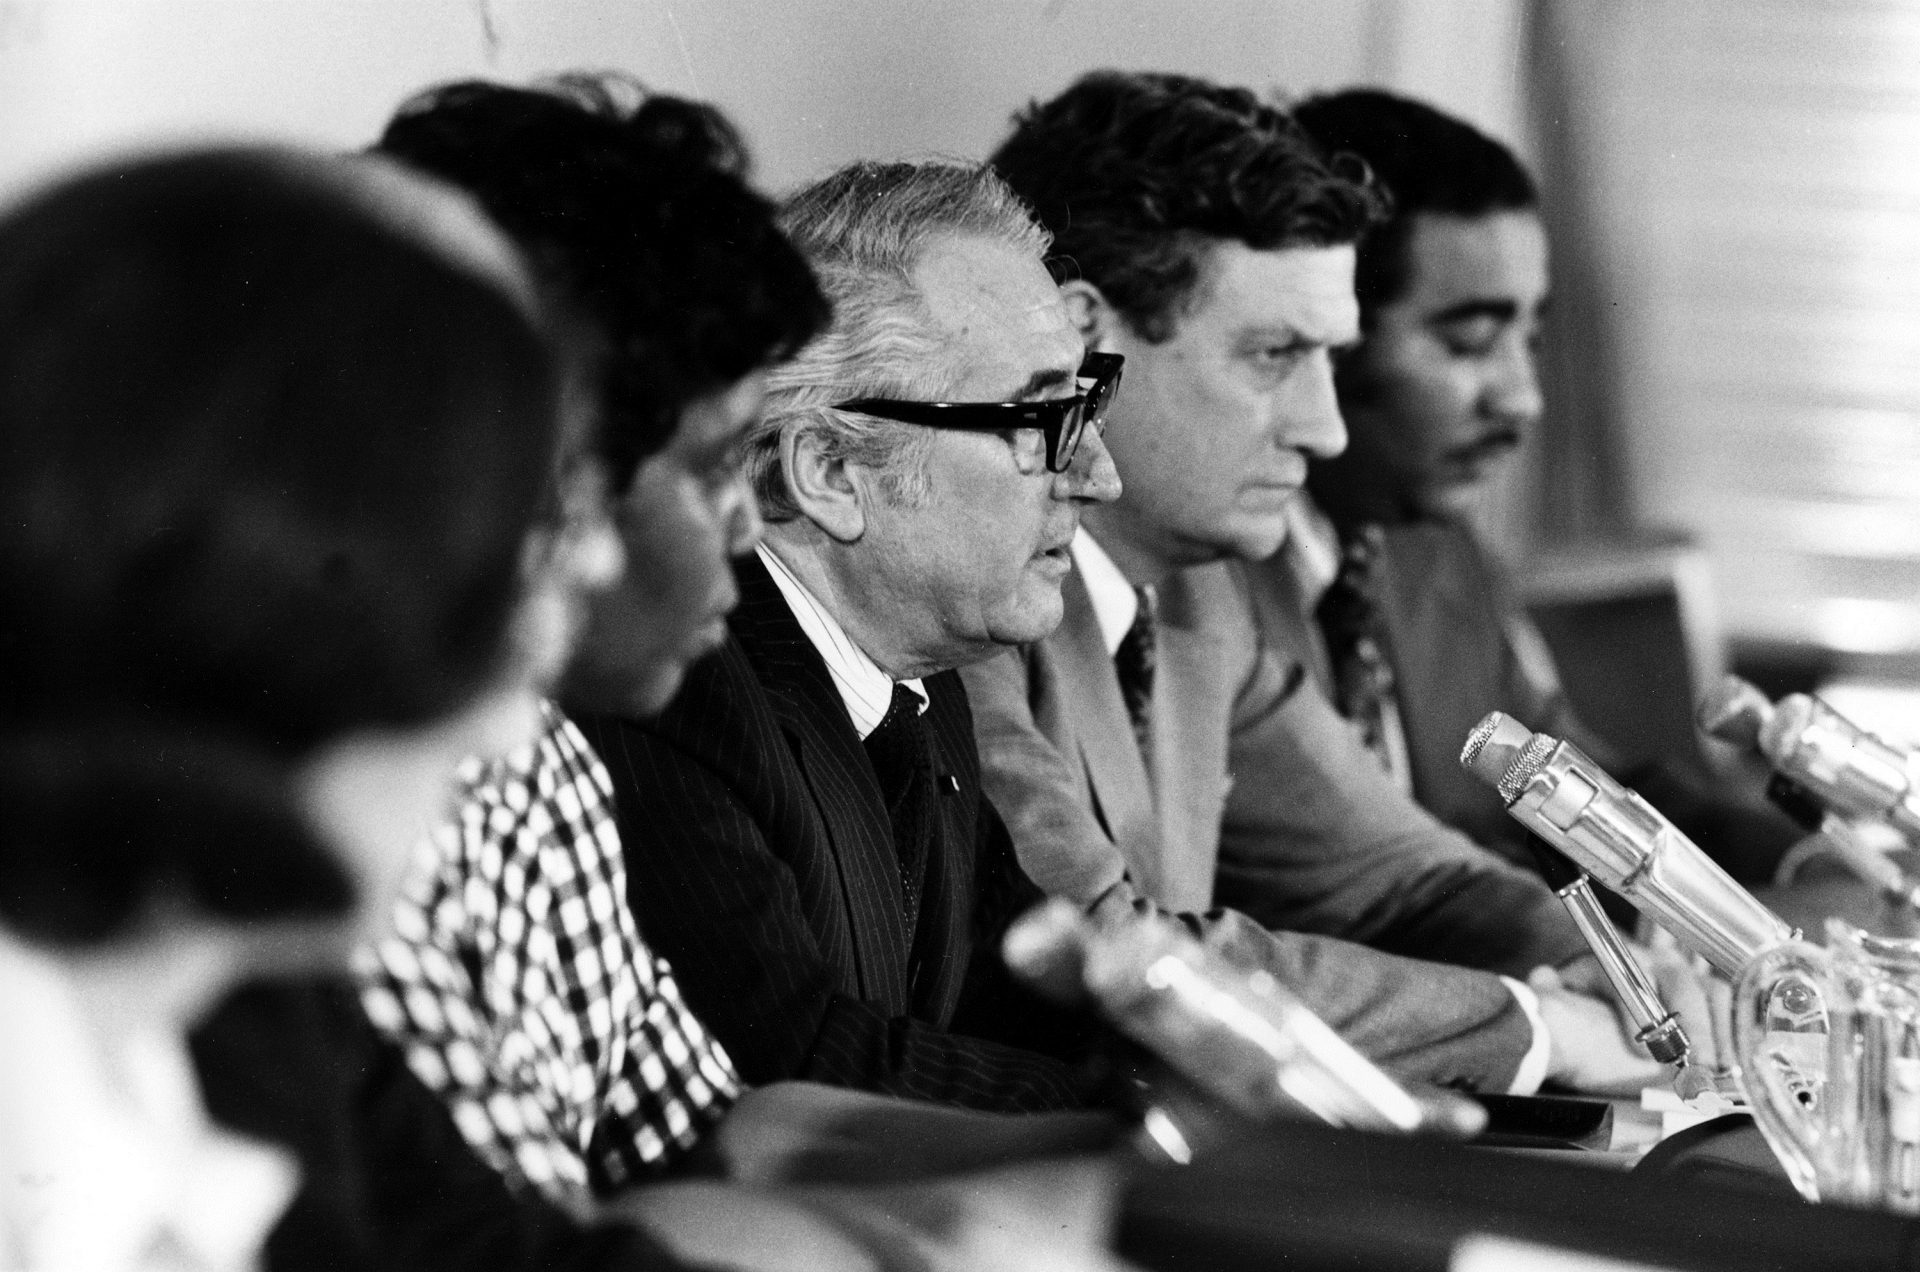 FILE PHOTO: Rep. Peter Rodino, D-N.J., chairman of the U.S. House of Representatives Judiciary Committee, reports on Thursday's public hearing session to review impeachment of President Nixon during a Capitol Hill news conference in Washington, D.C., Friday, May 17, 1974. At right is majority counsel John Doar. At left is committee member Barbara Jordan, D-Texas. 